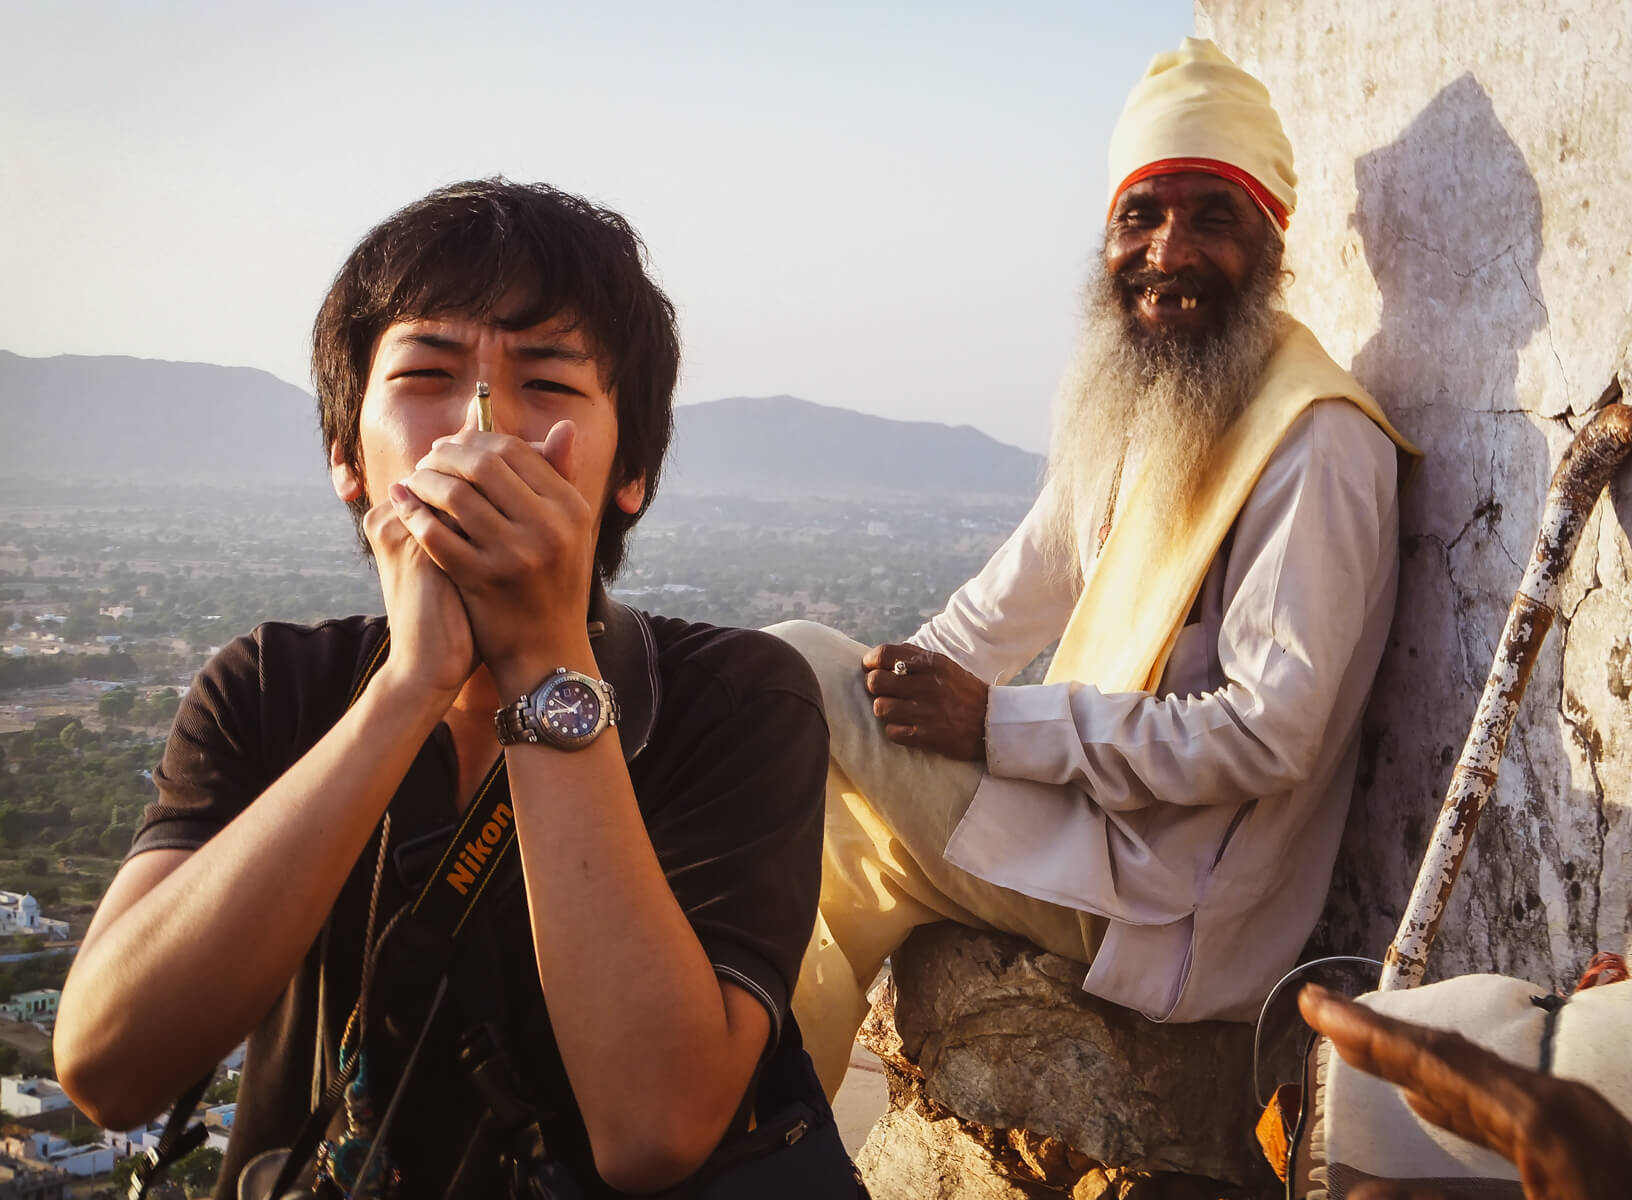 A backpacker travelling India smokes weed with an old local man